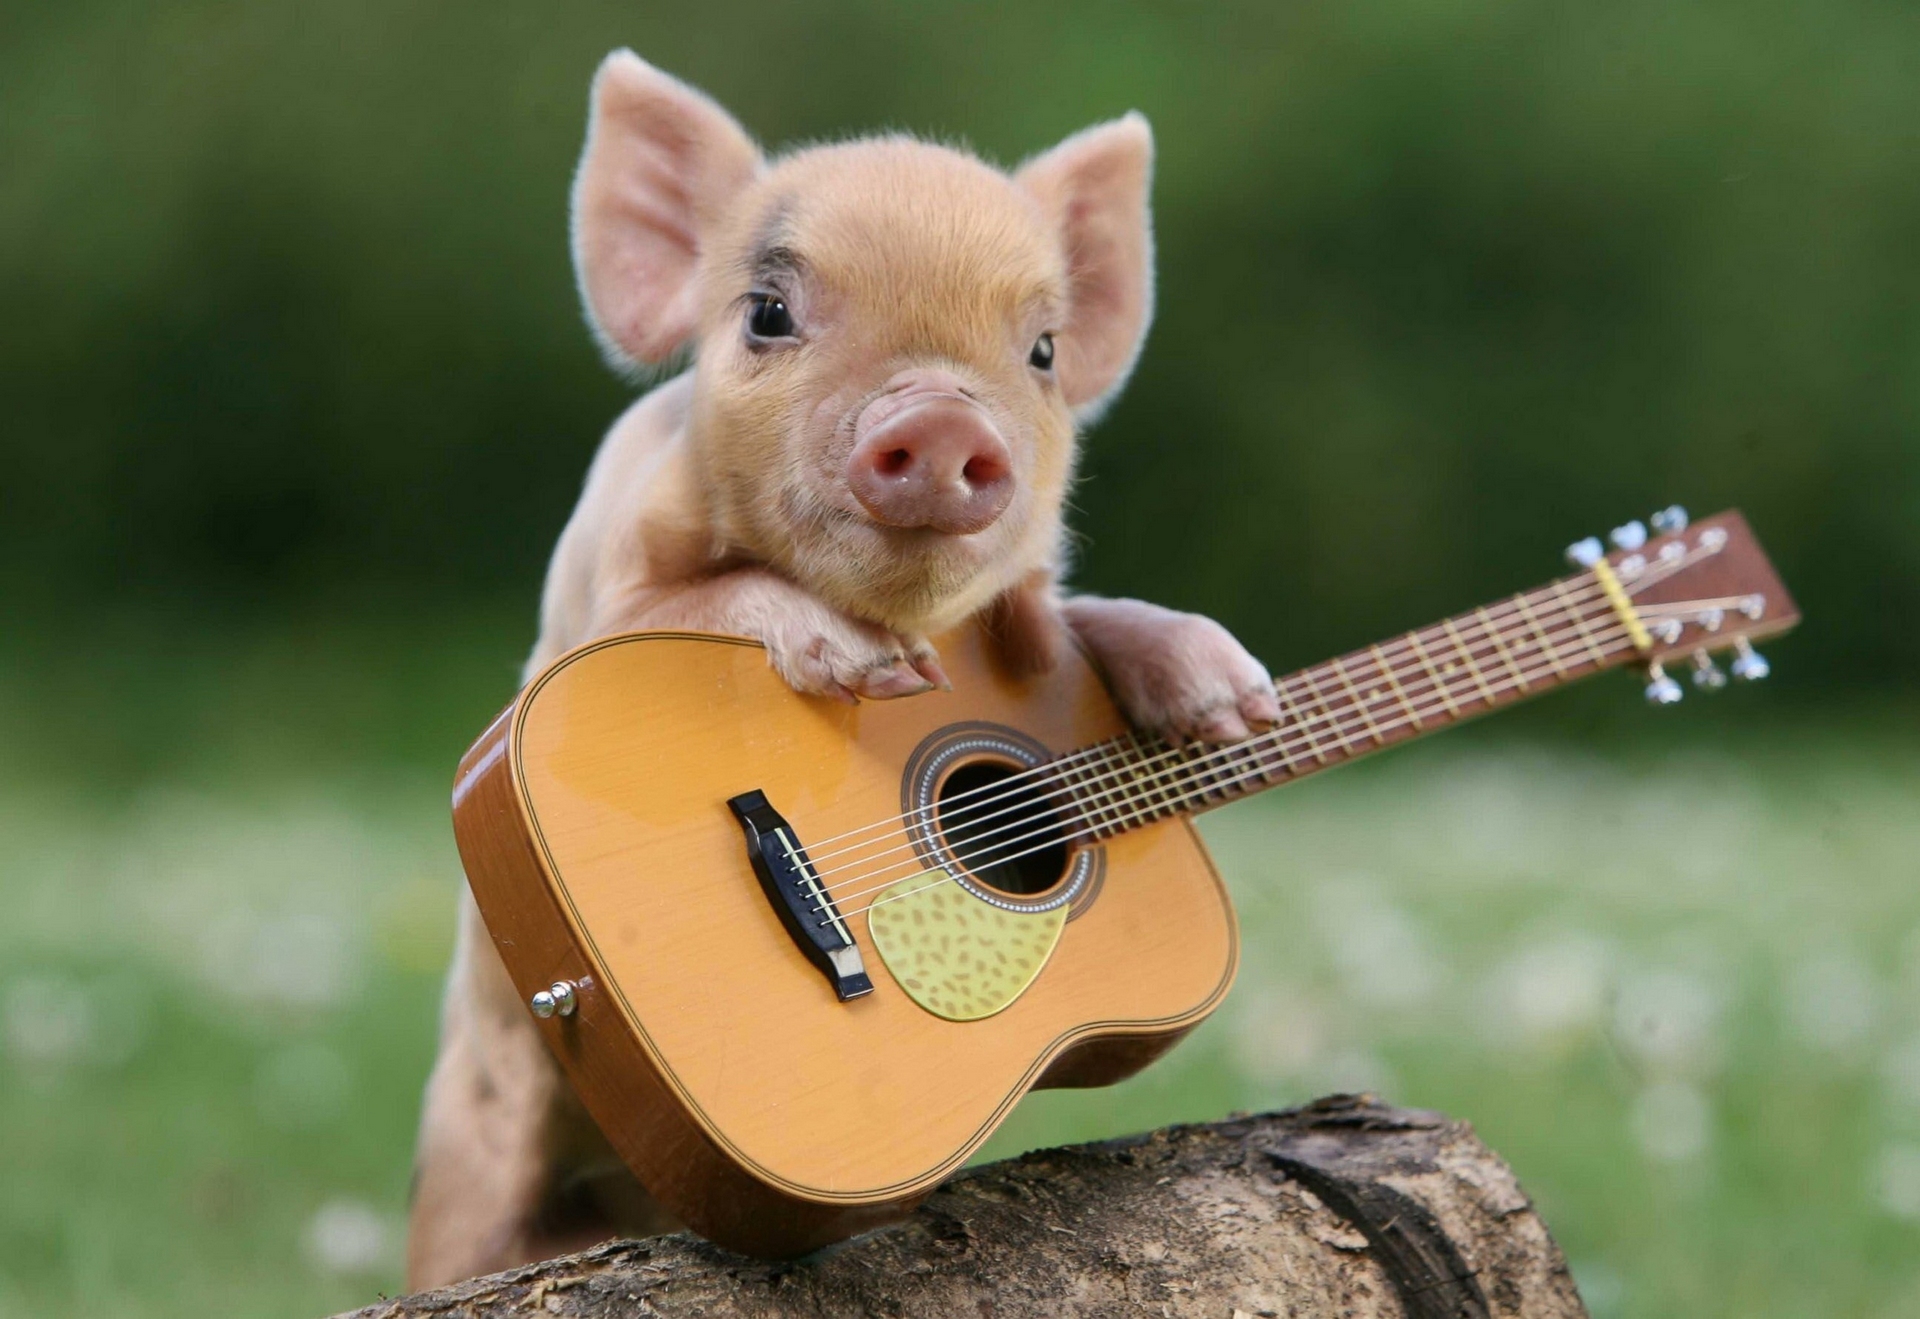 97722 Screensavers and Wallpapers Guitar for phone. Download animals, guitar, pig, piglet pictures for free